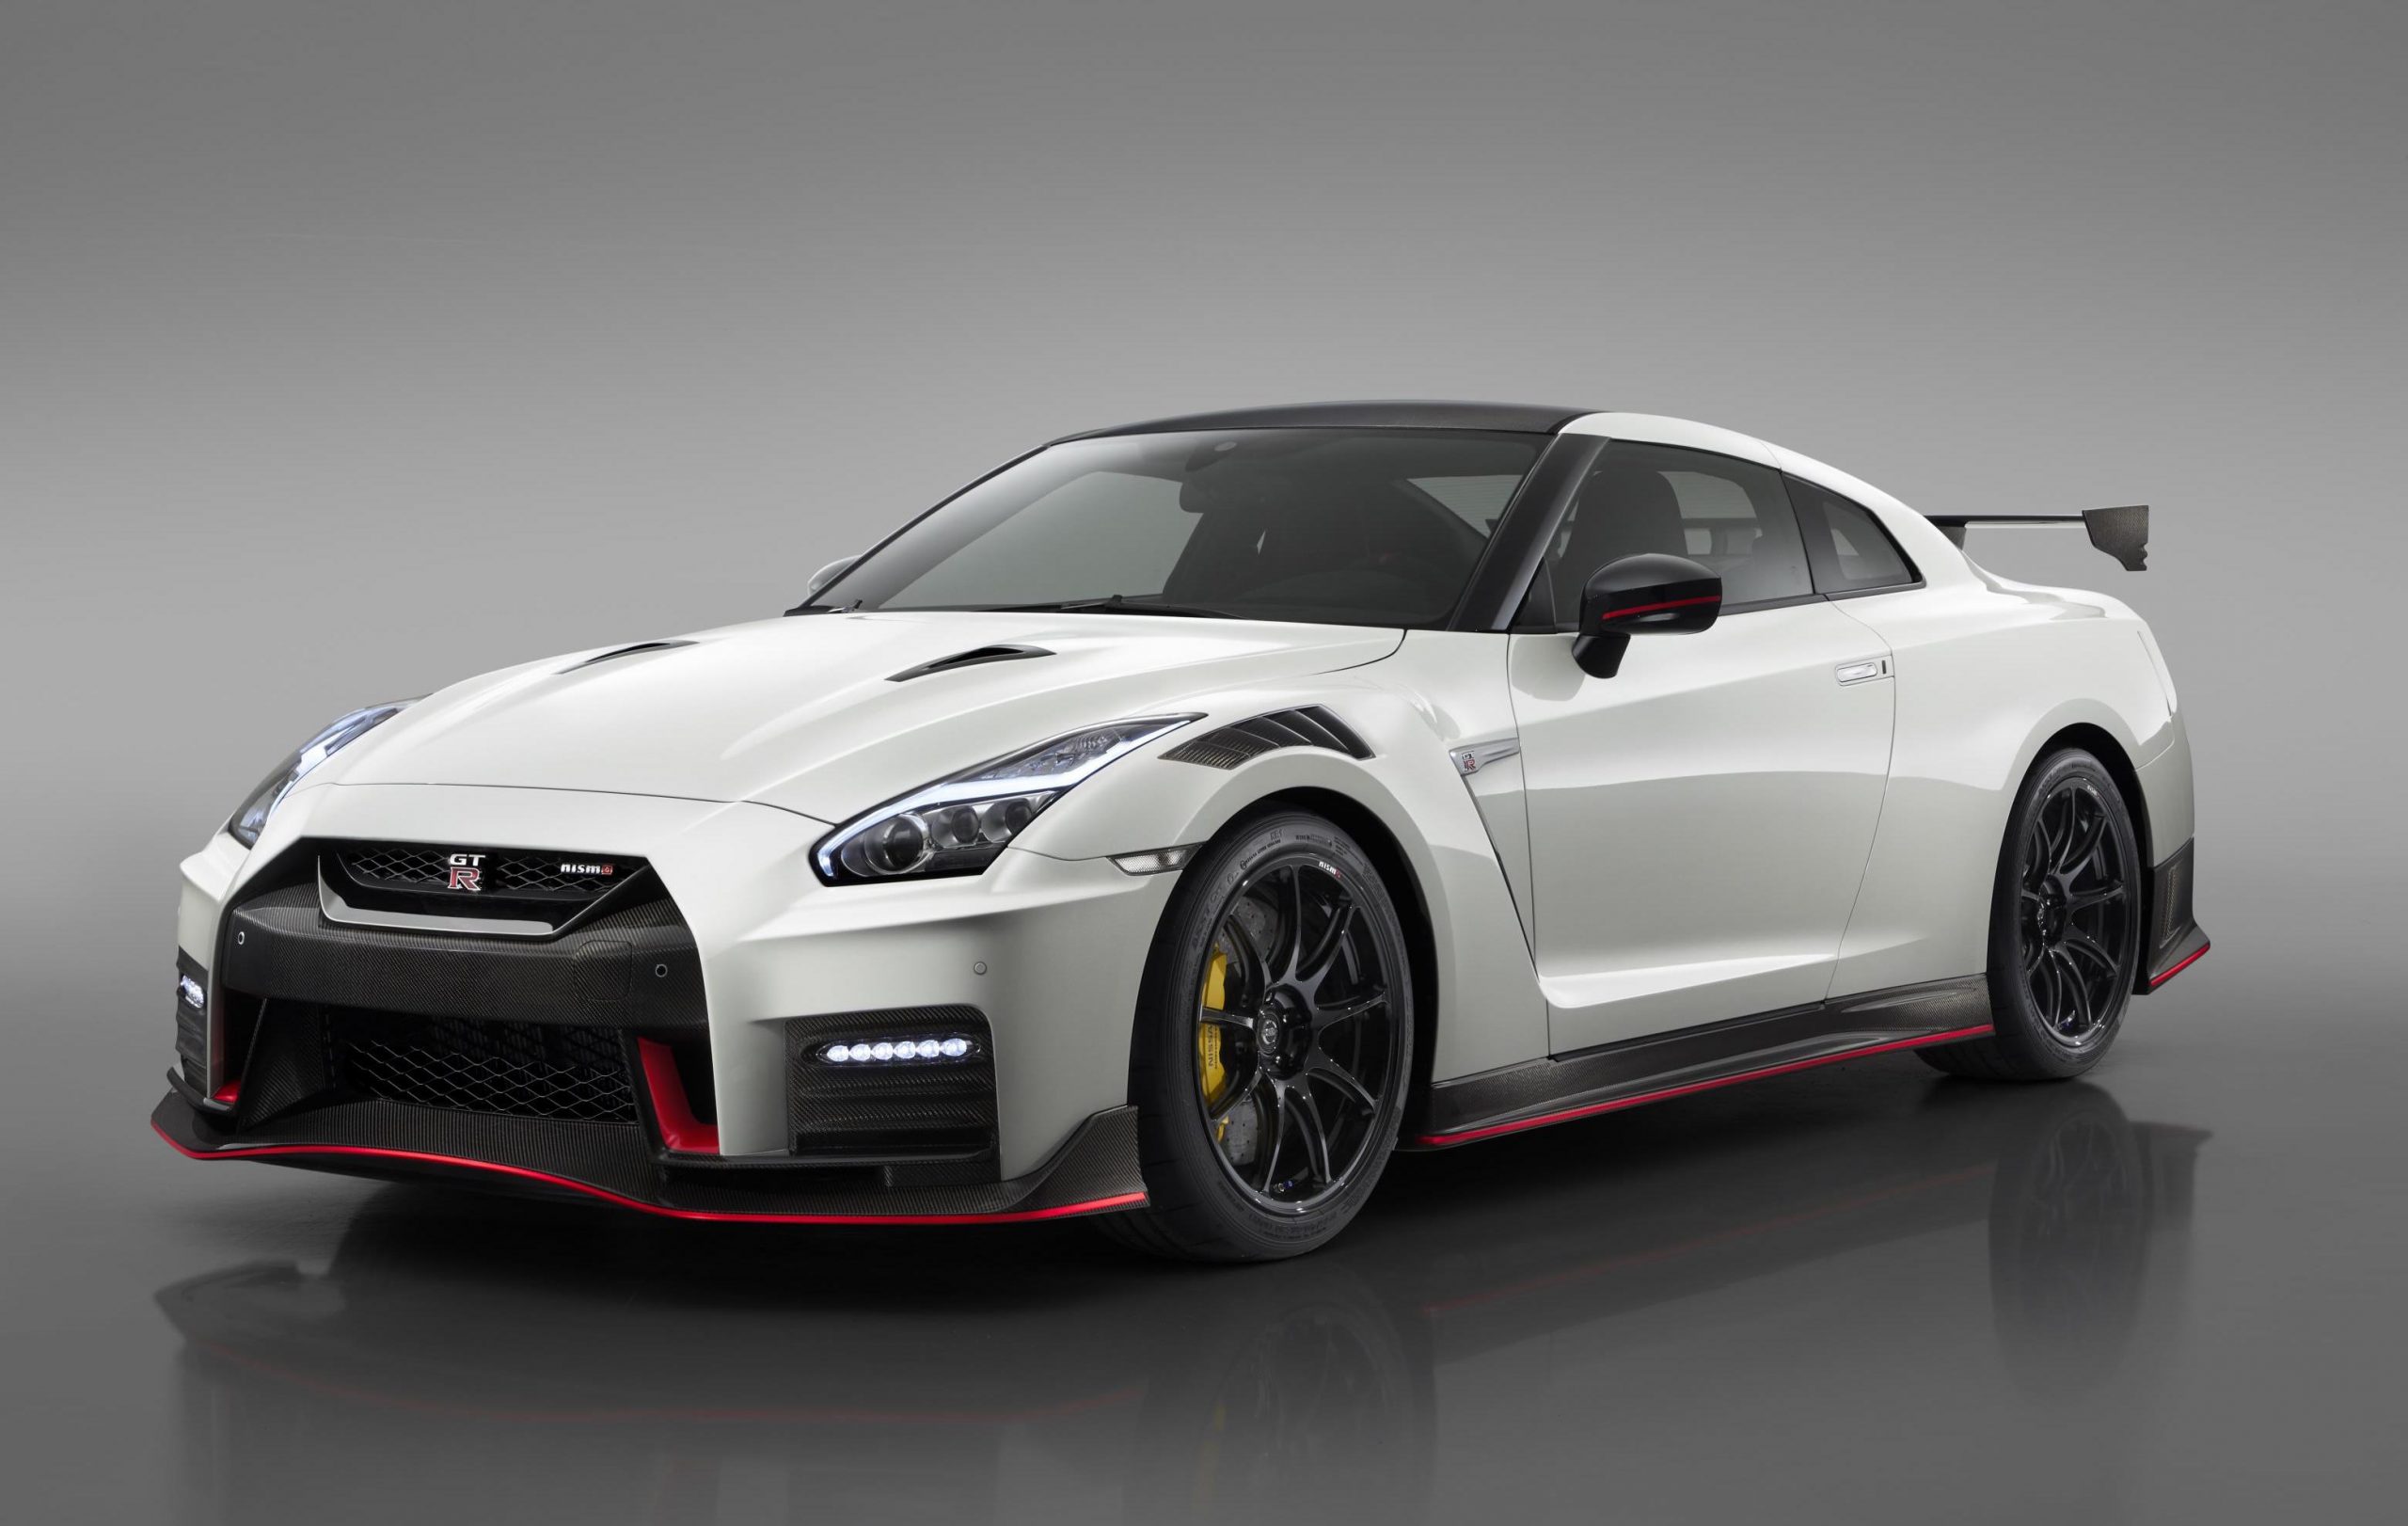 2020 Nissan GT-R Nismo unveiled